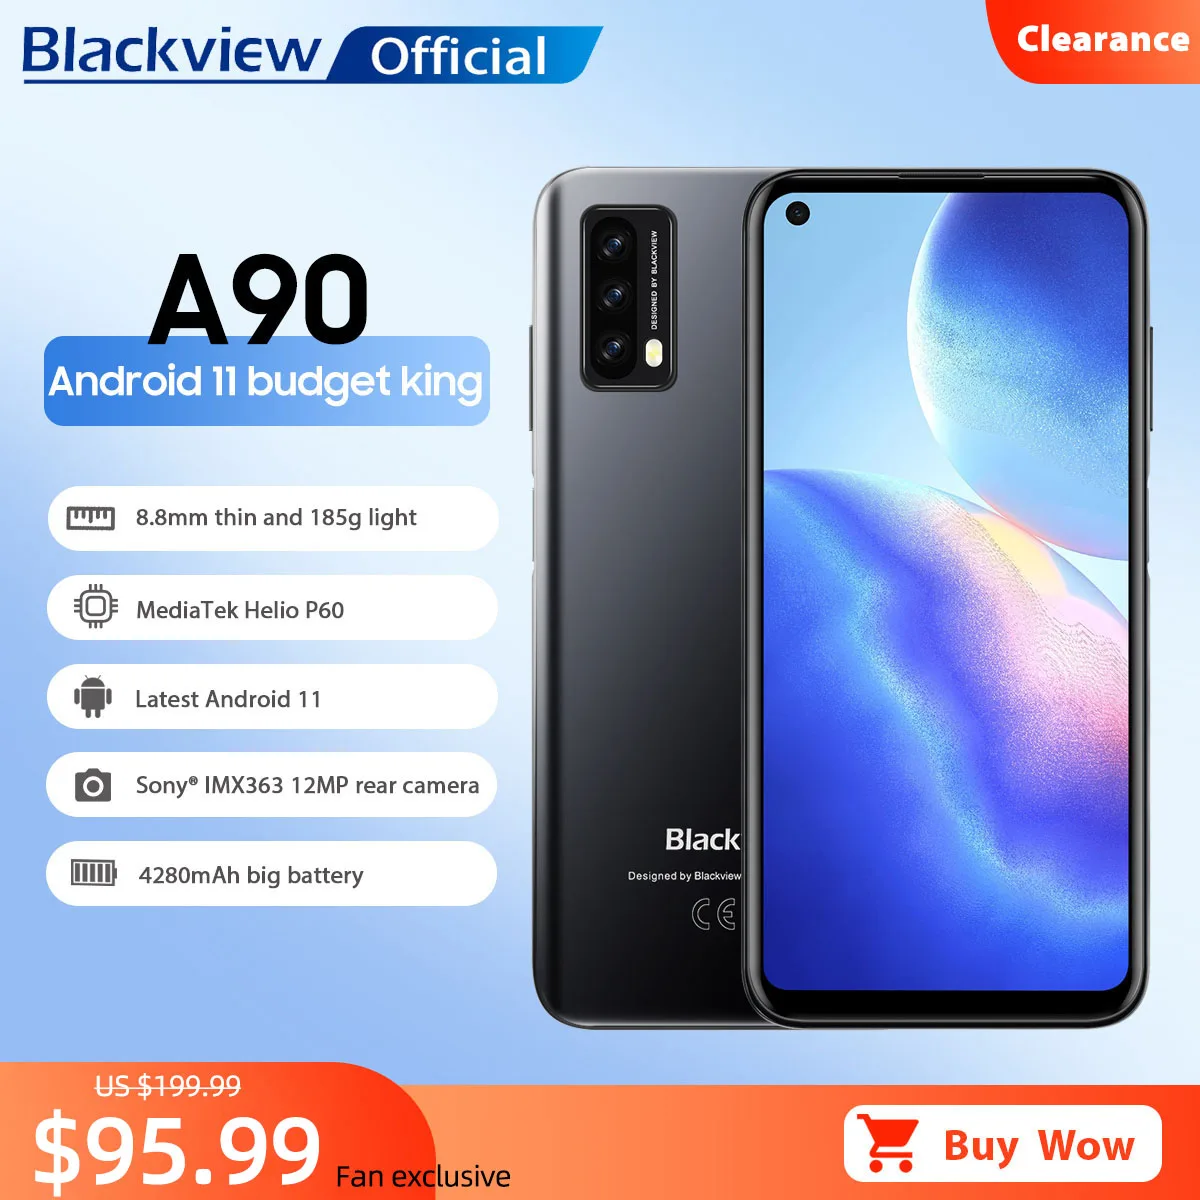 

Blackview A90 Smartphone Helio P60 Octa Core 12MP HDR Camera Mobile Phone 4GB+64GB 4280mAh Android 11 Telephone 4G LTE Celular